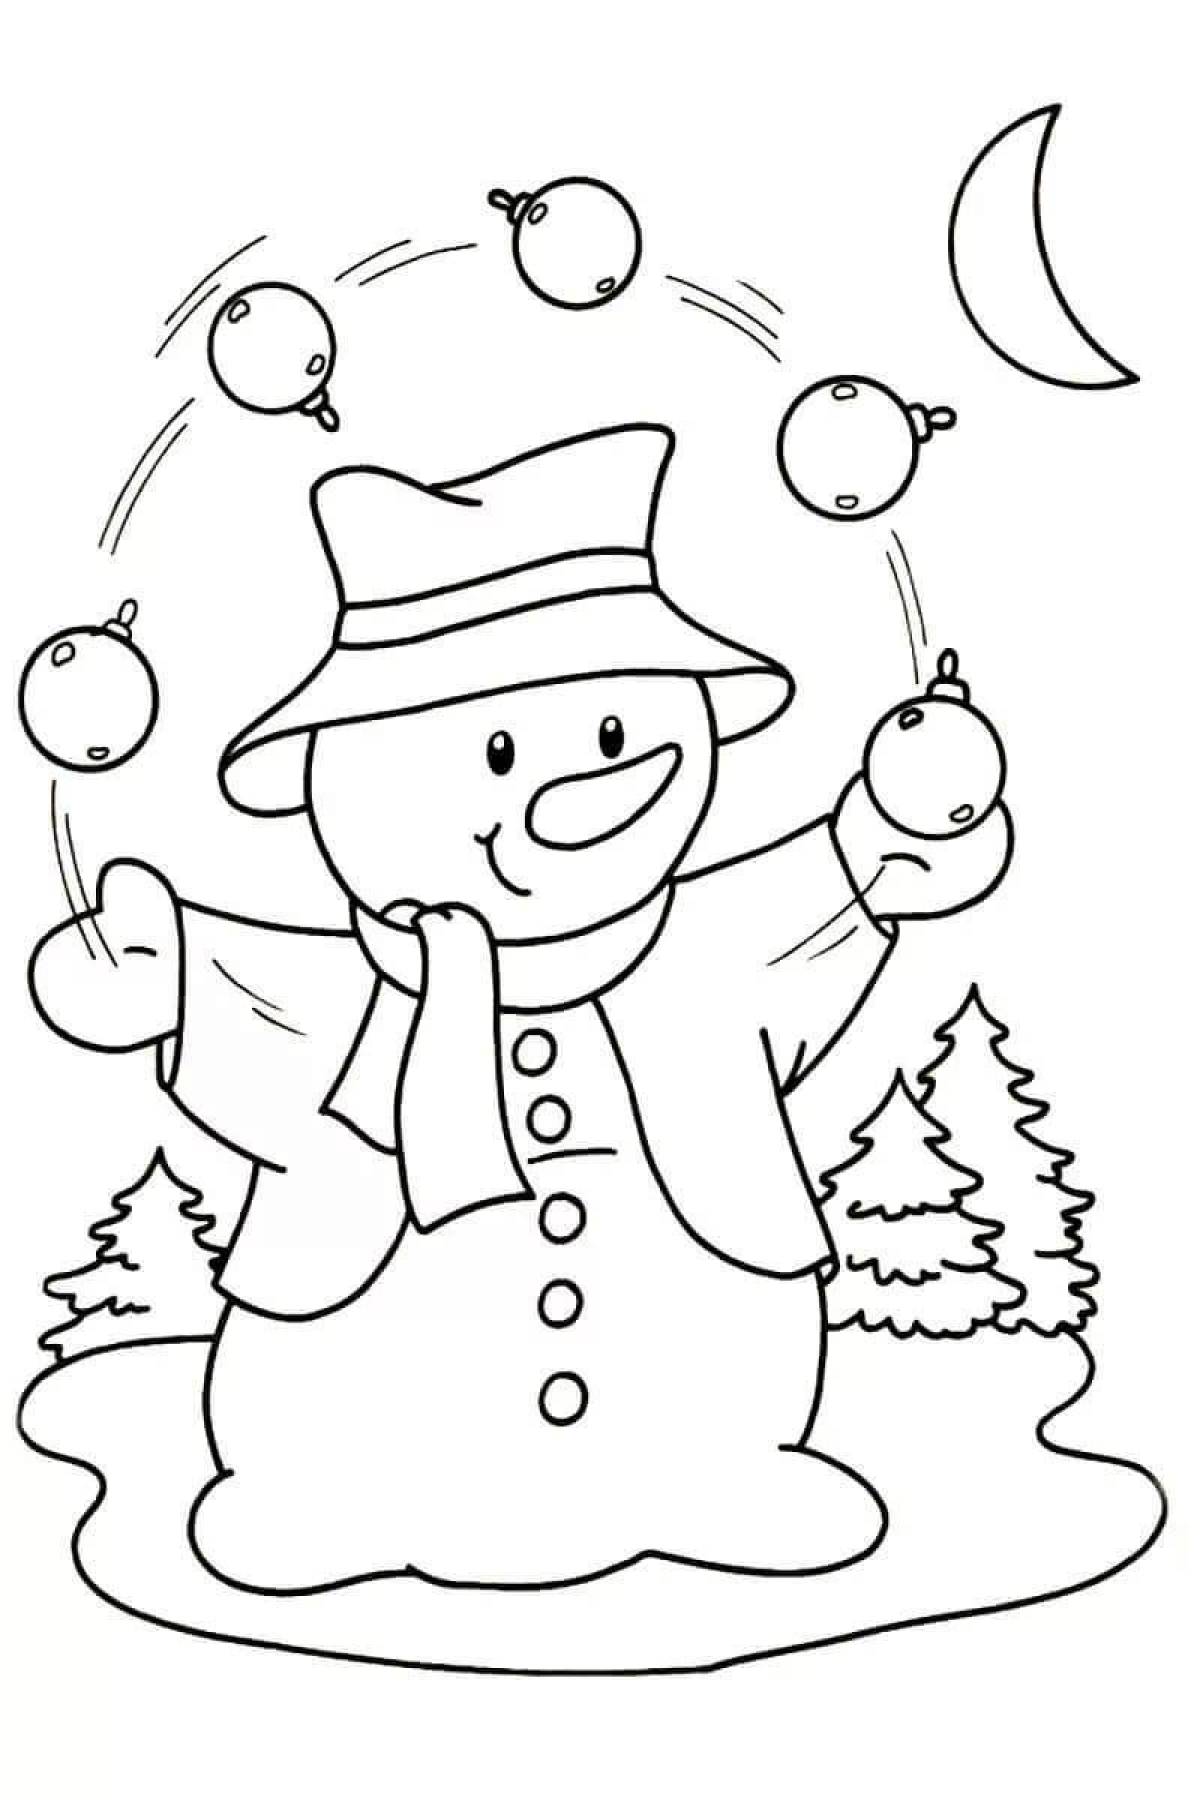 Humorous snowman coloring book for kids